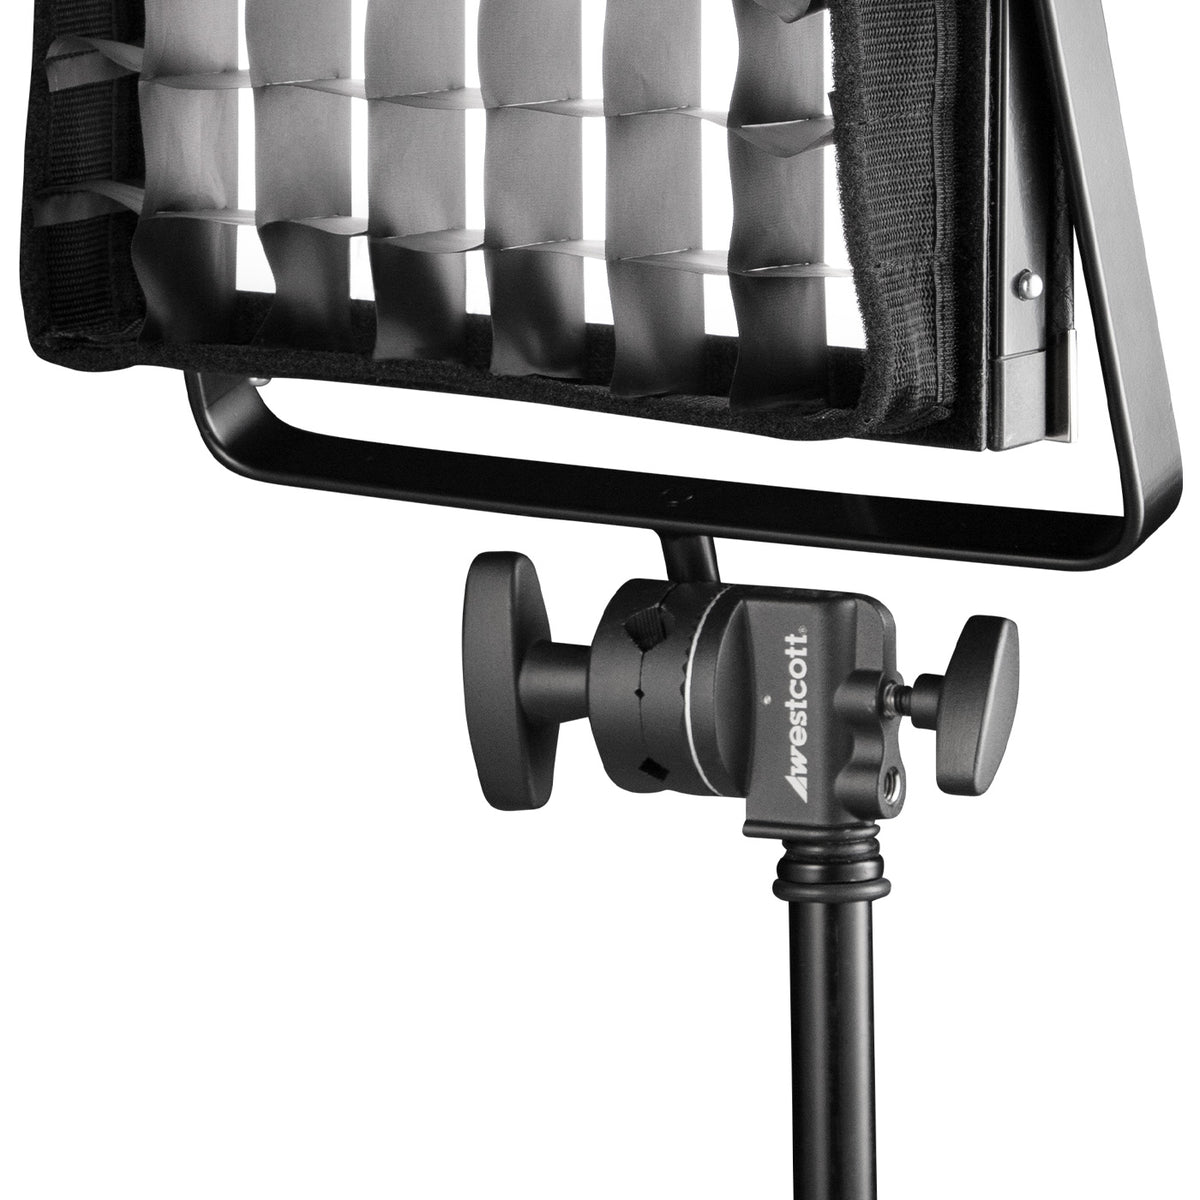 Flex Cine Mat with Grid Mounted to Light Stand Using Yoke